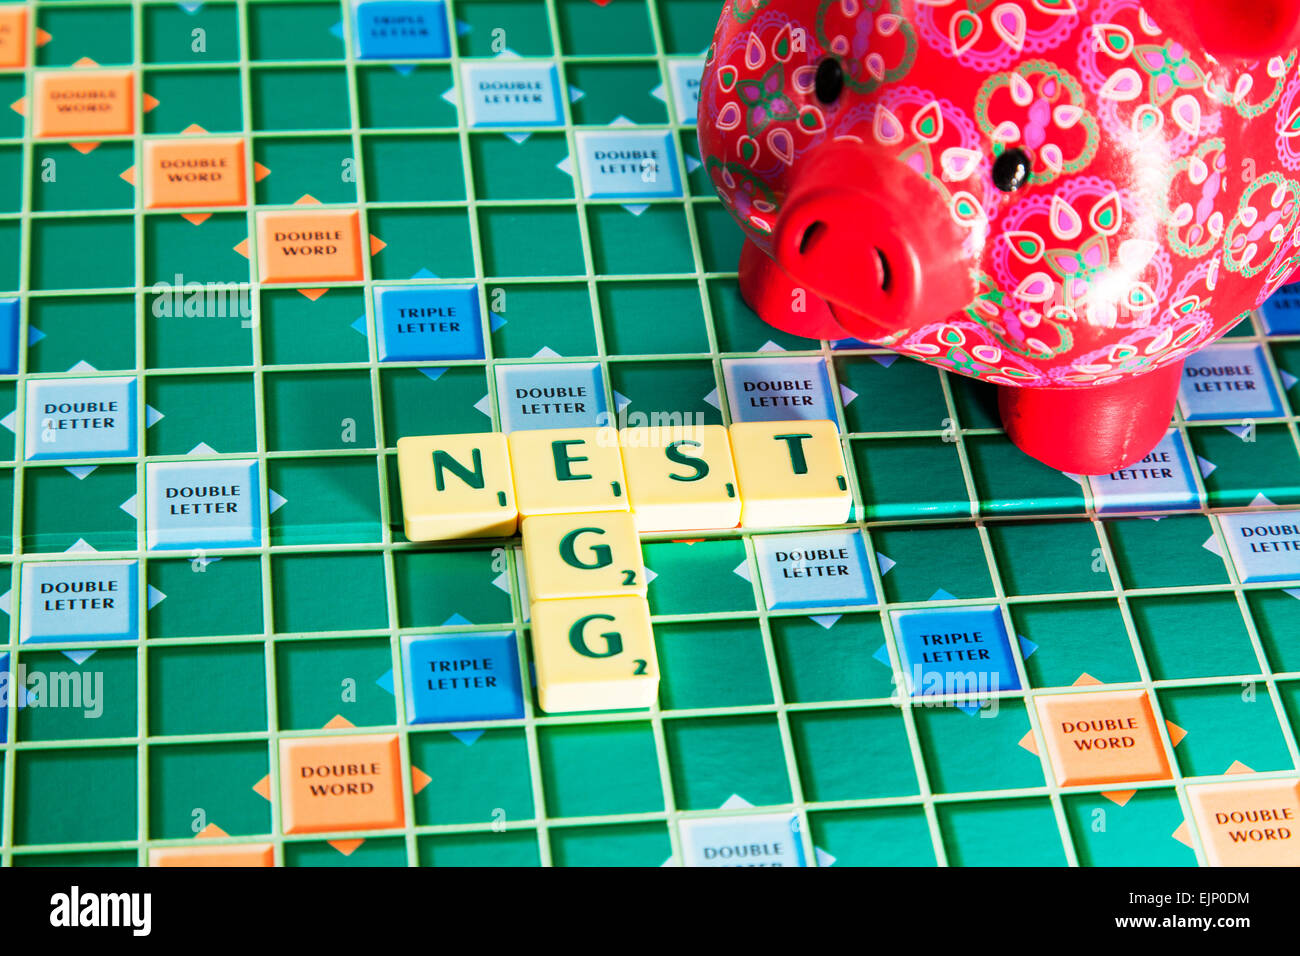 piggy bank nest egg savings money pound coins pension save rainy day words fund using scrabble tiles to illustrate spelling Stock Photo